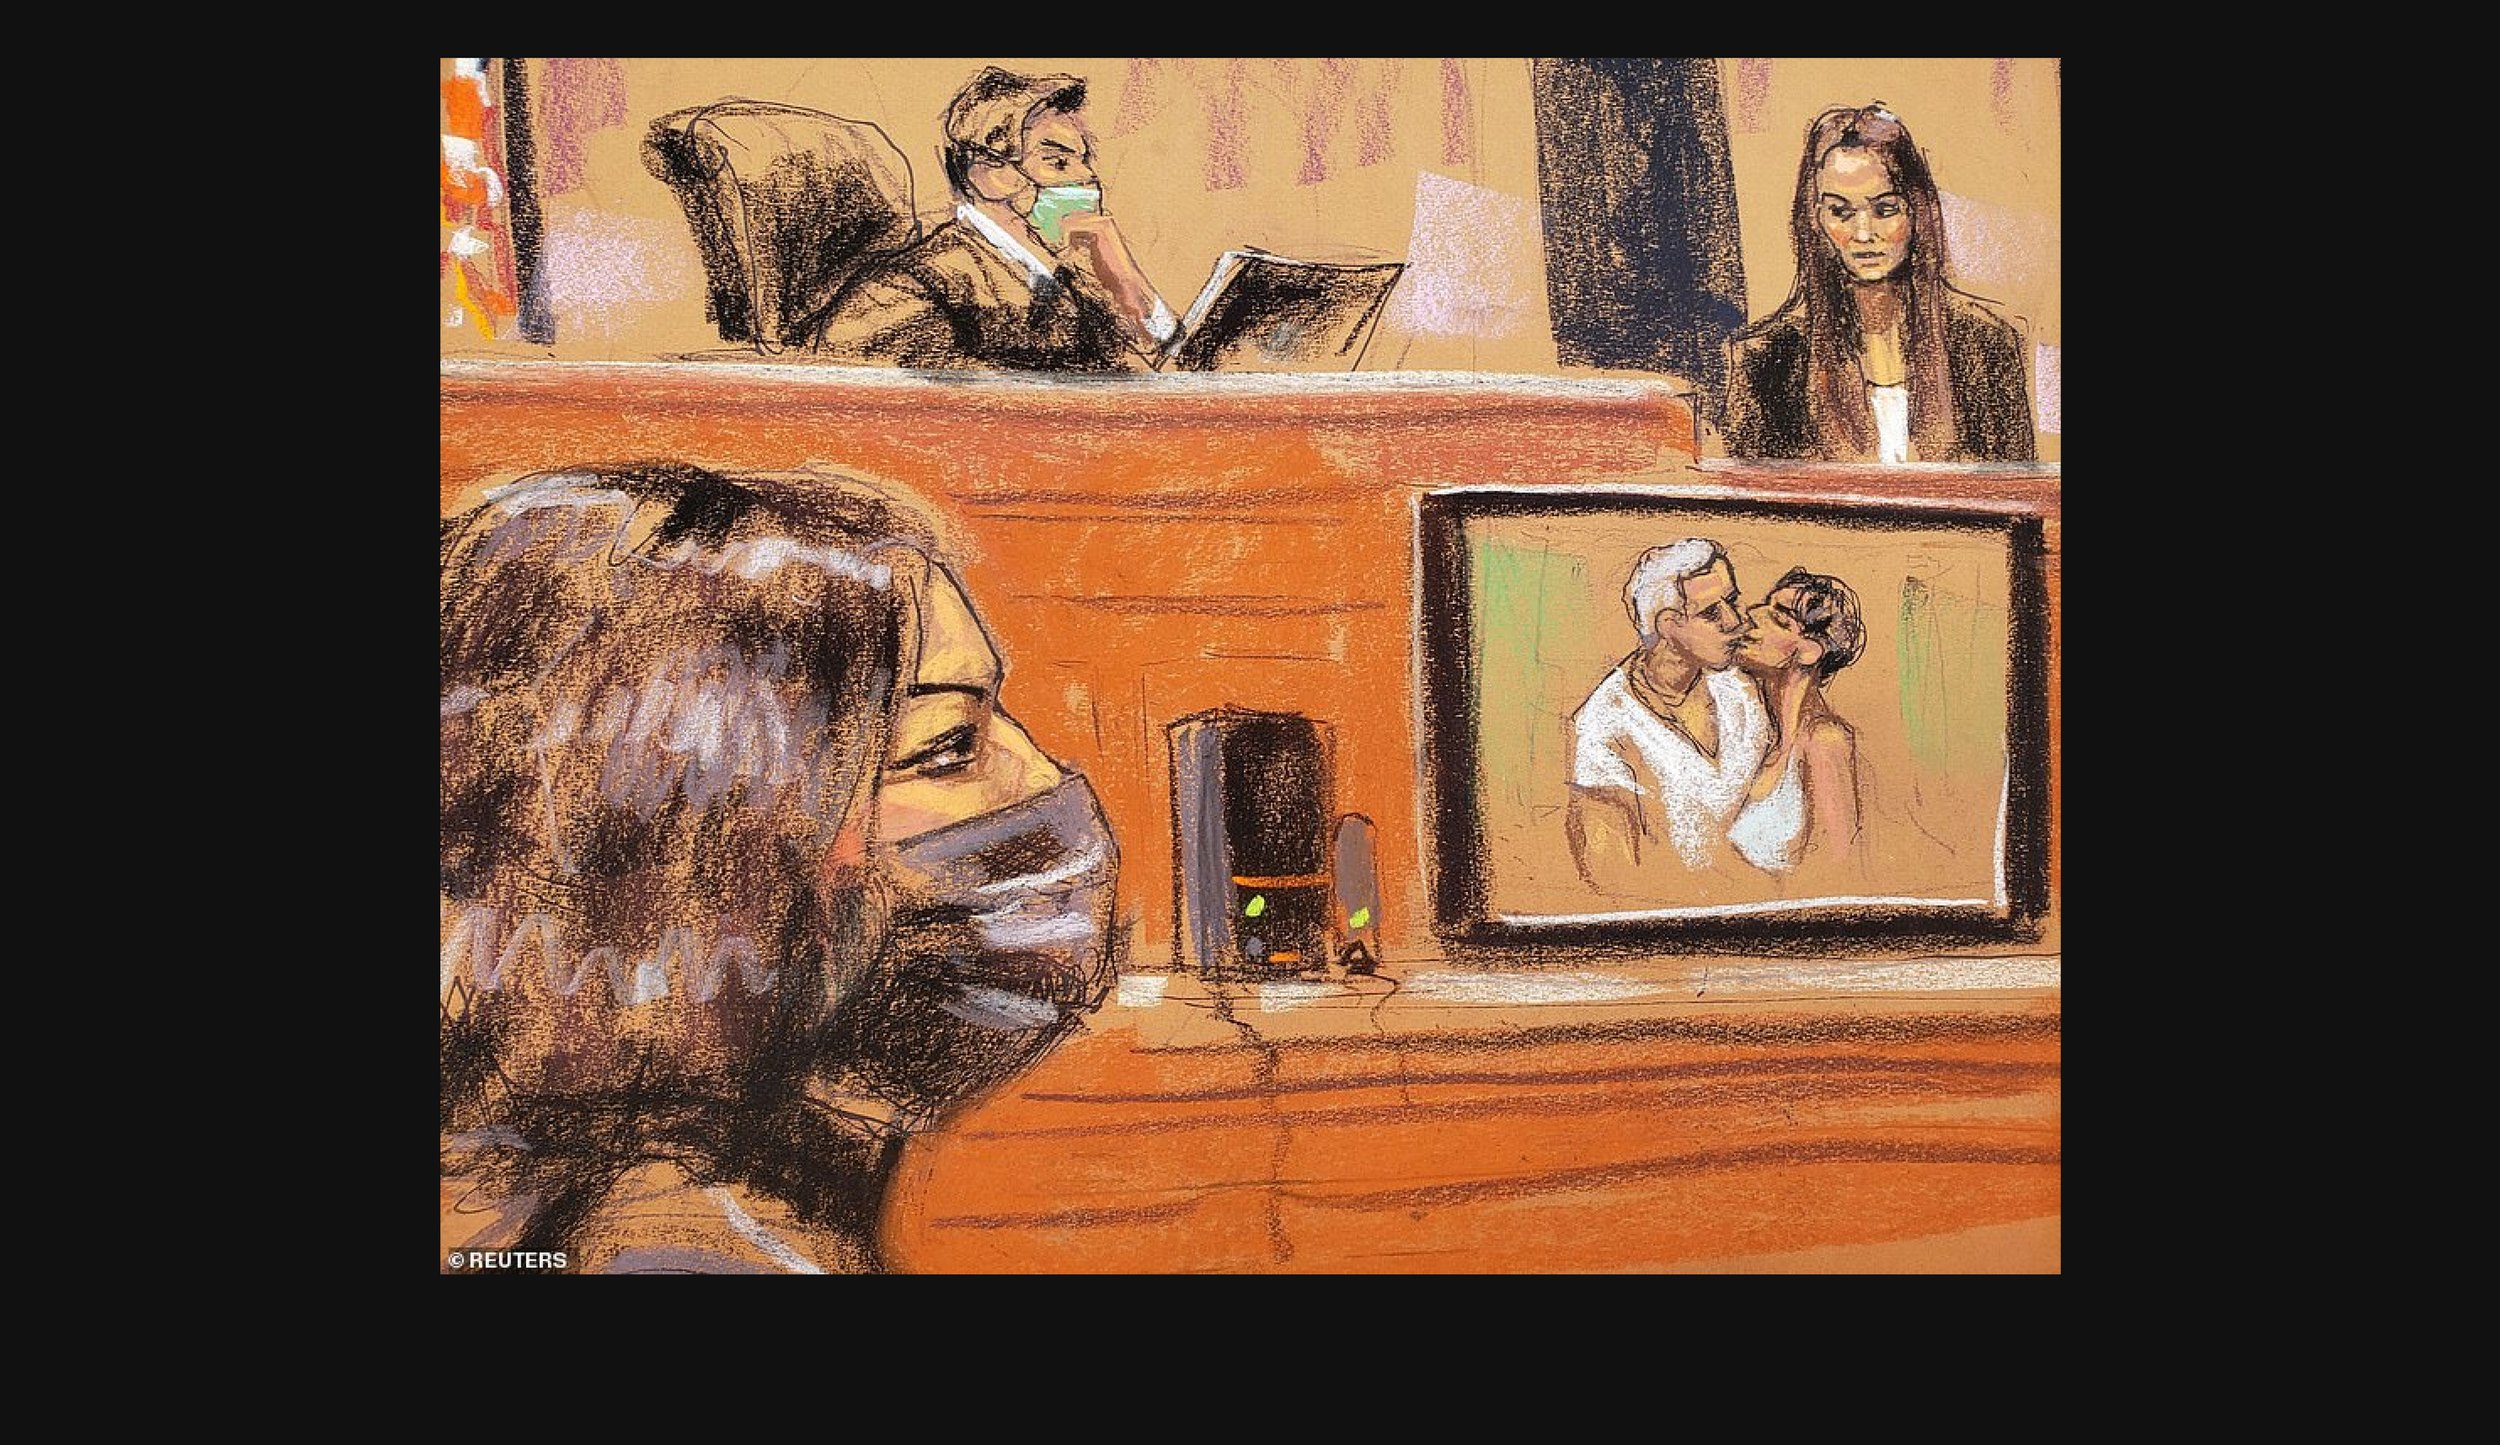  Photo of Jeffrey and Ghislaine kissing during trial 